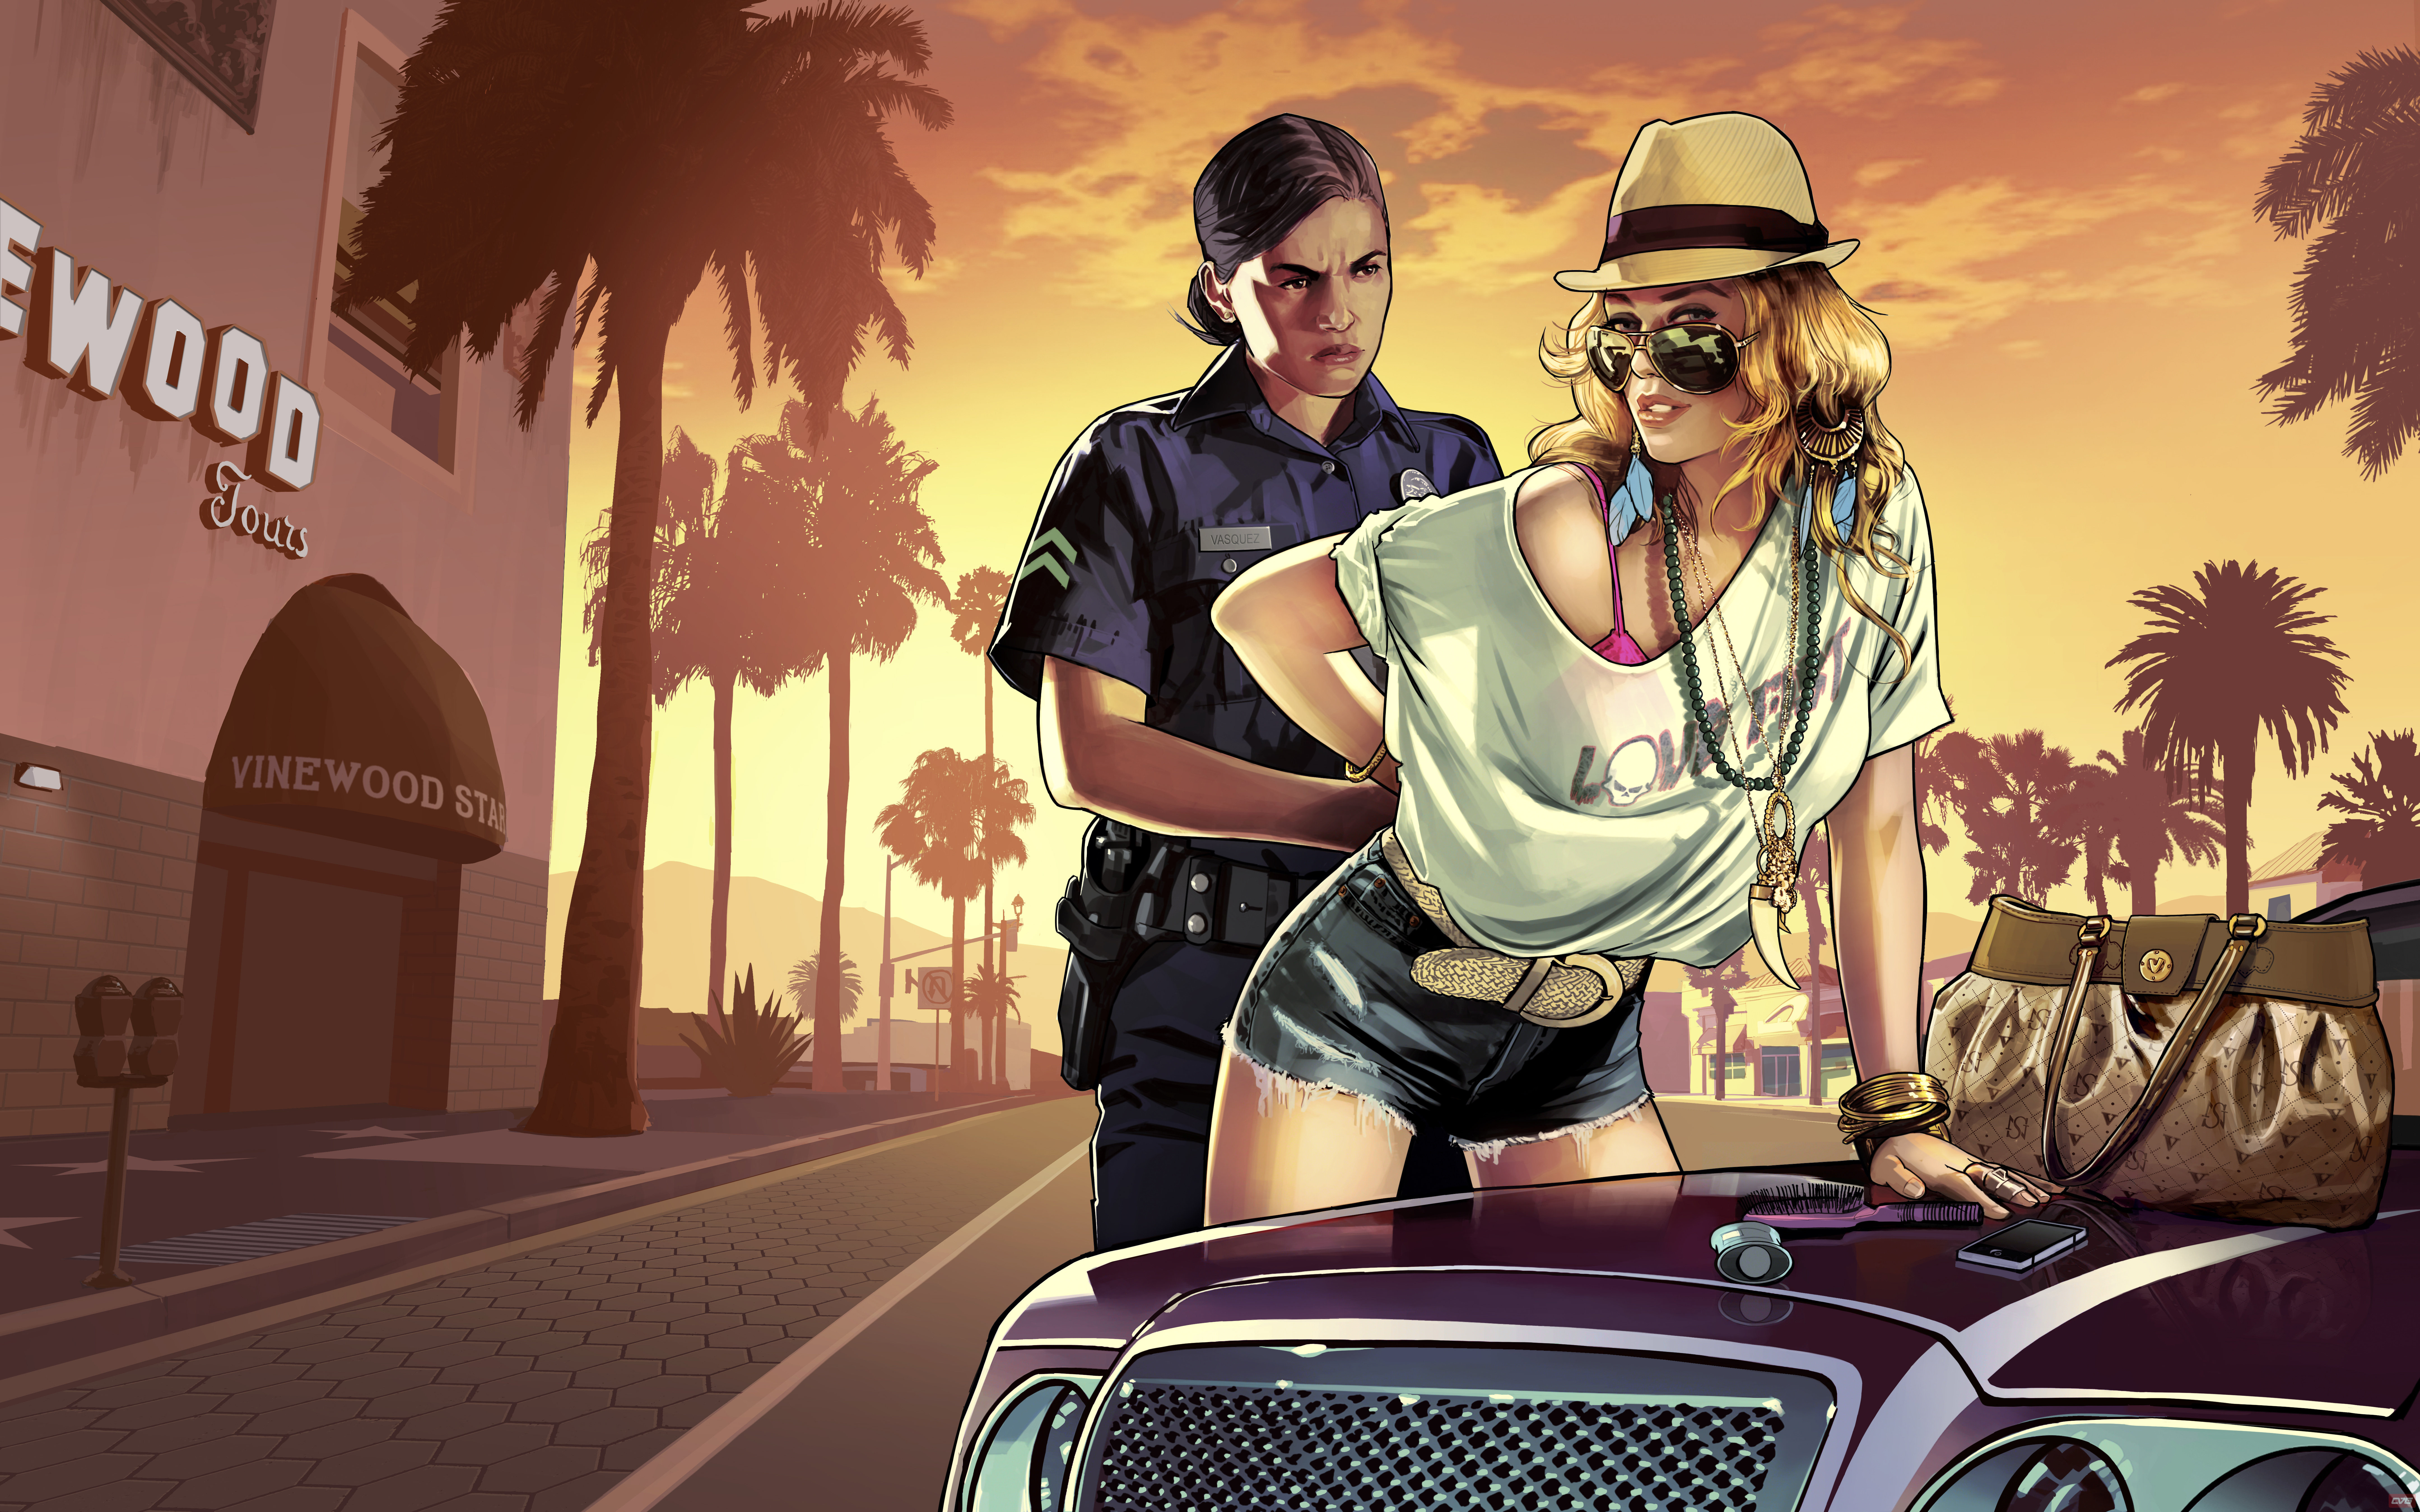 A picture from gta 5 with a police girl.